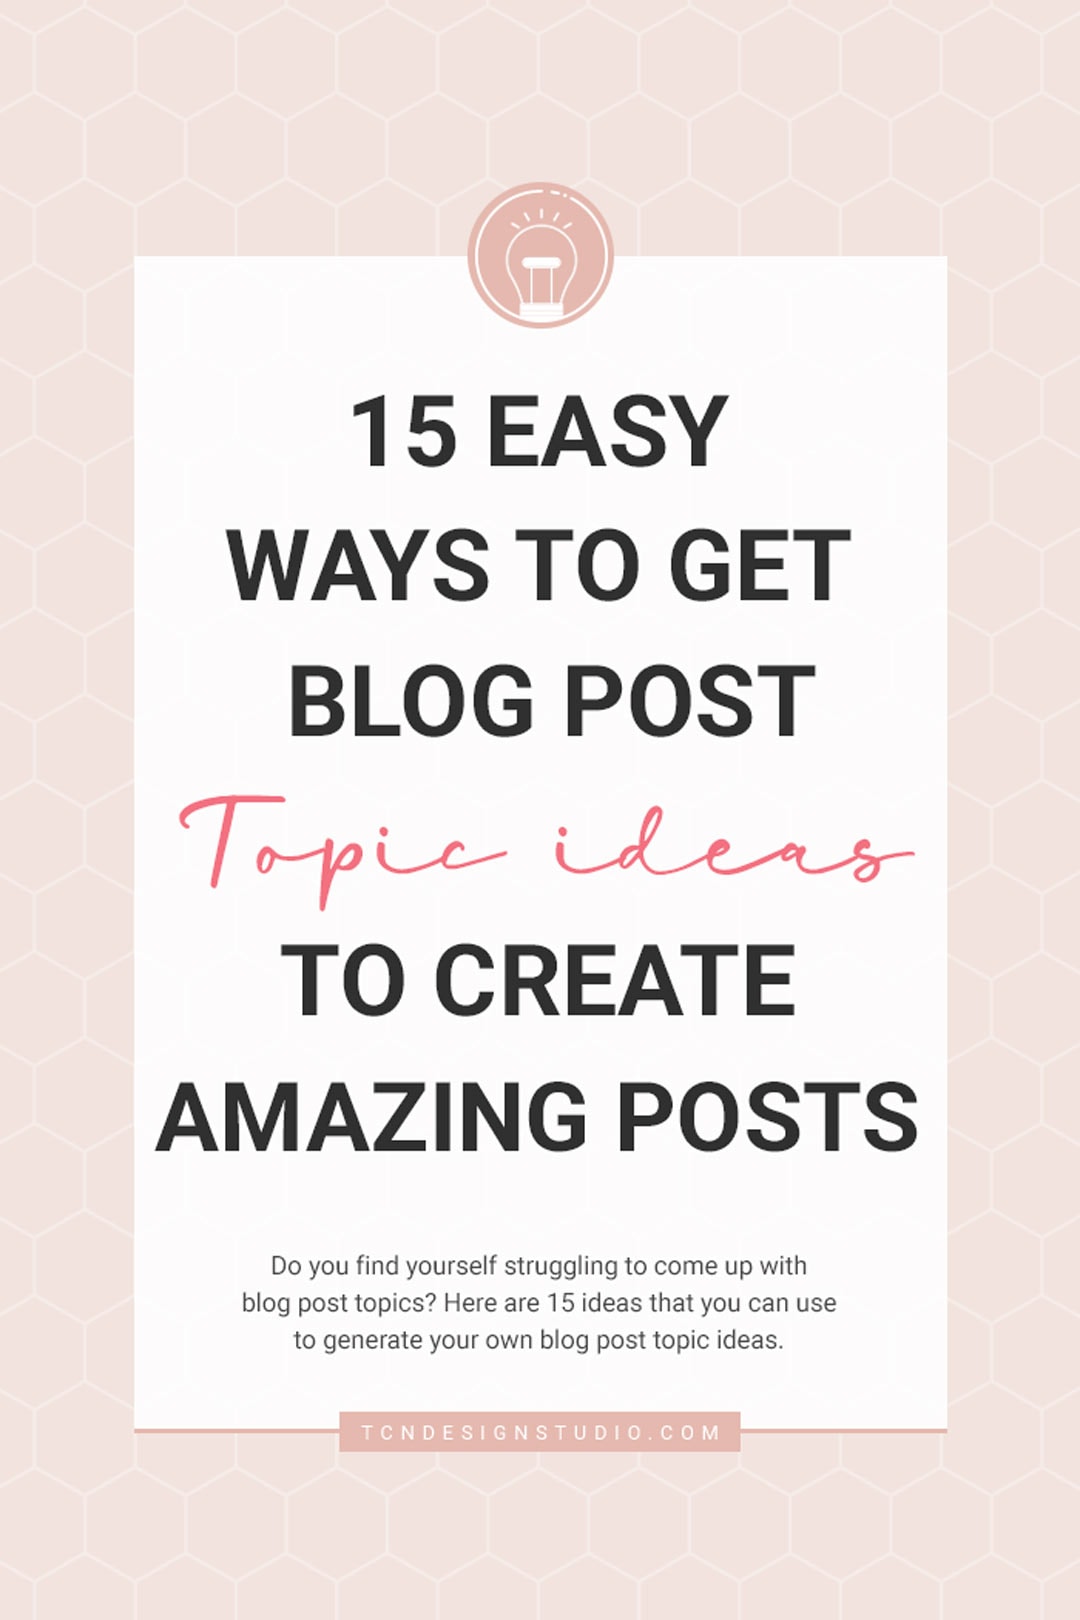 15 Easy Ways to Get Blog Post Topic Ideas Cover Image with title overlay